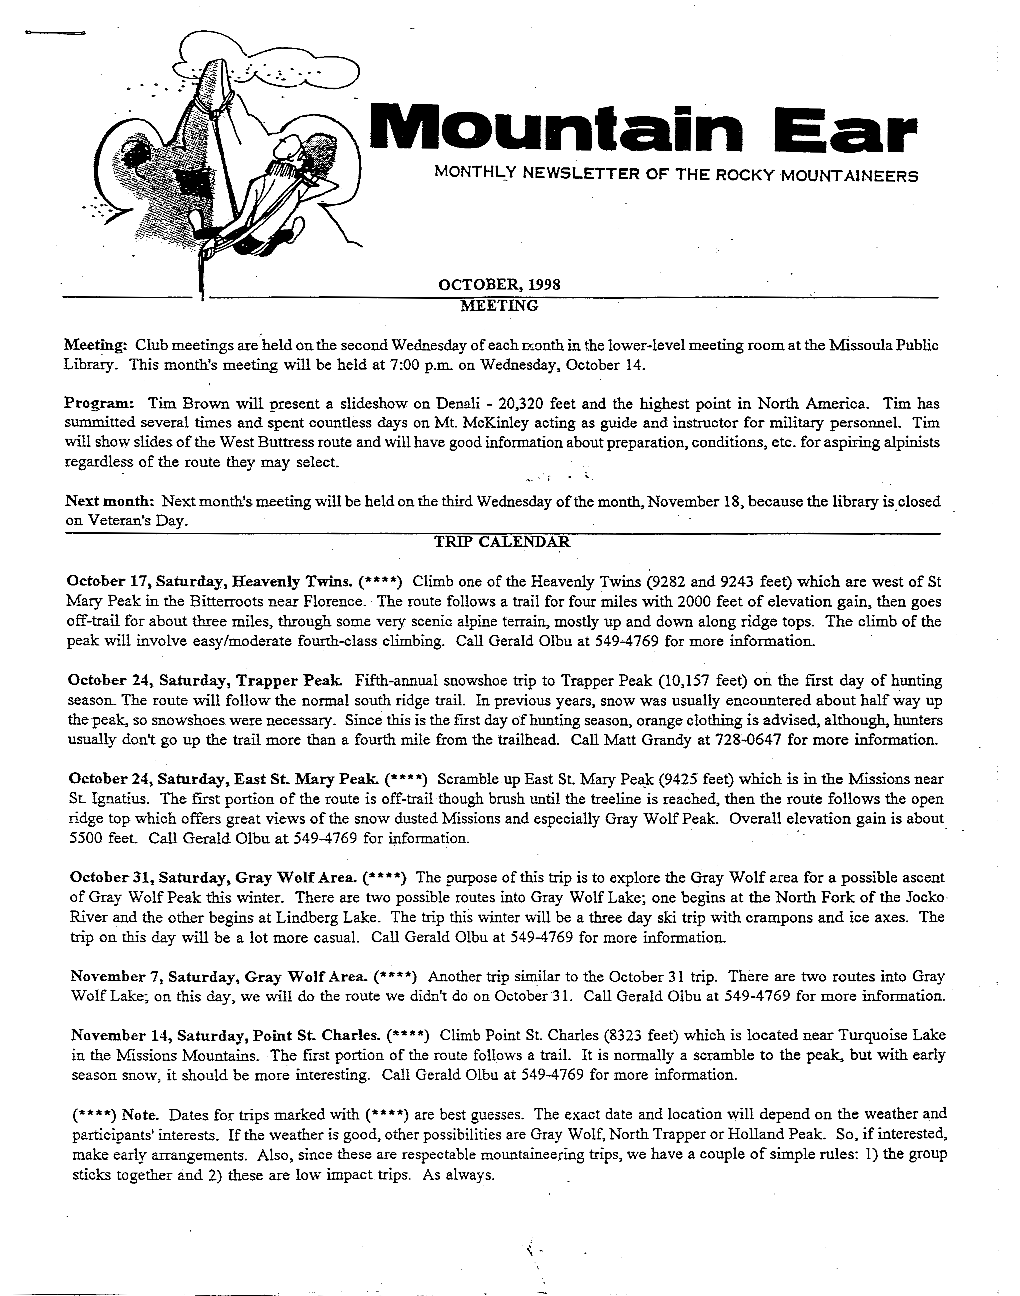 Mountain Ear M0NTHL.Y NEWSLETTER of the ROCKY .MOUNTAINEERS